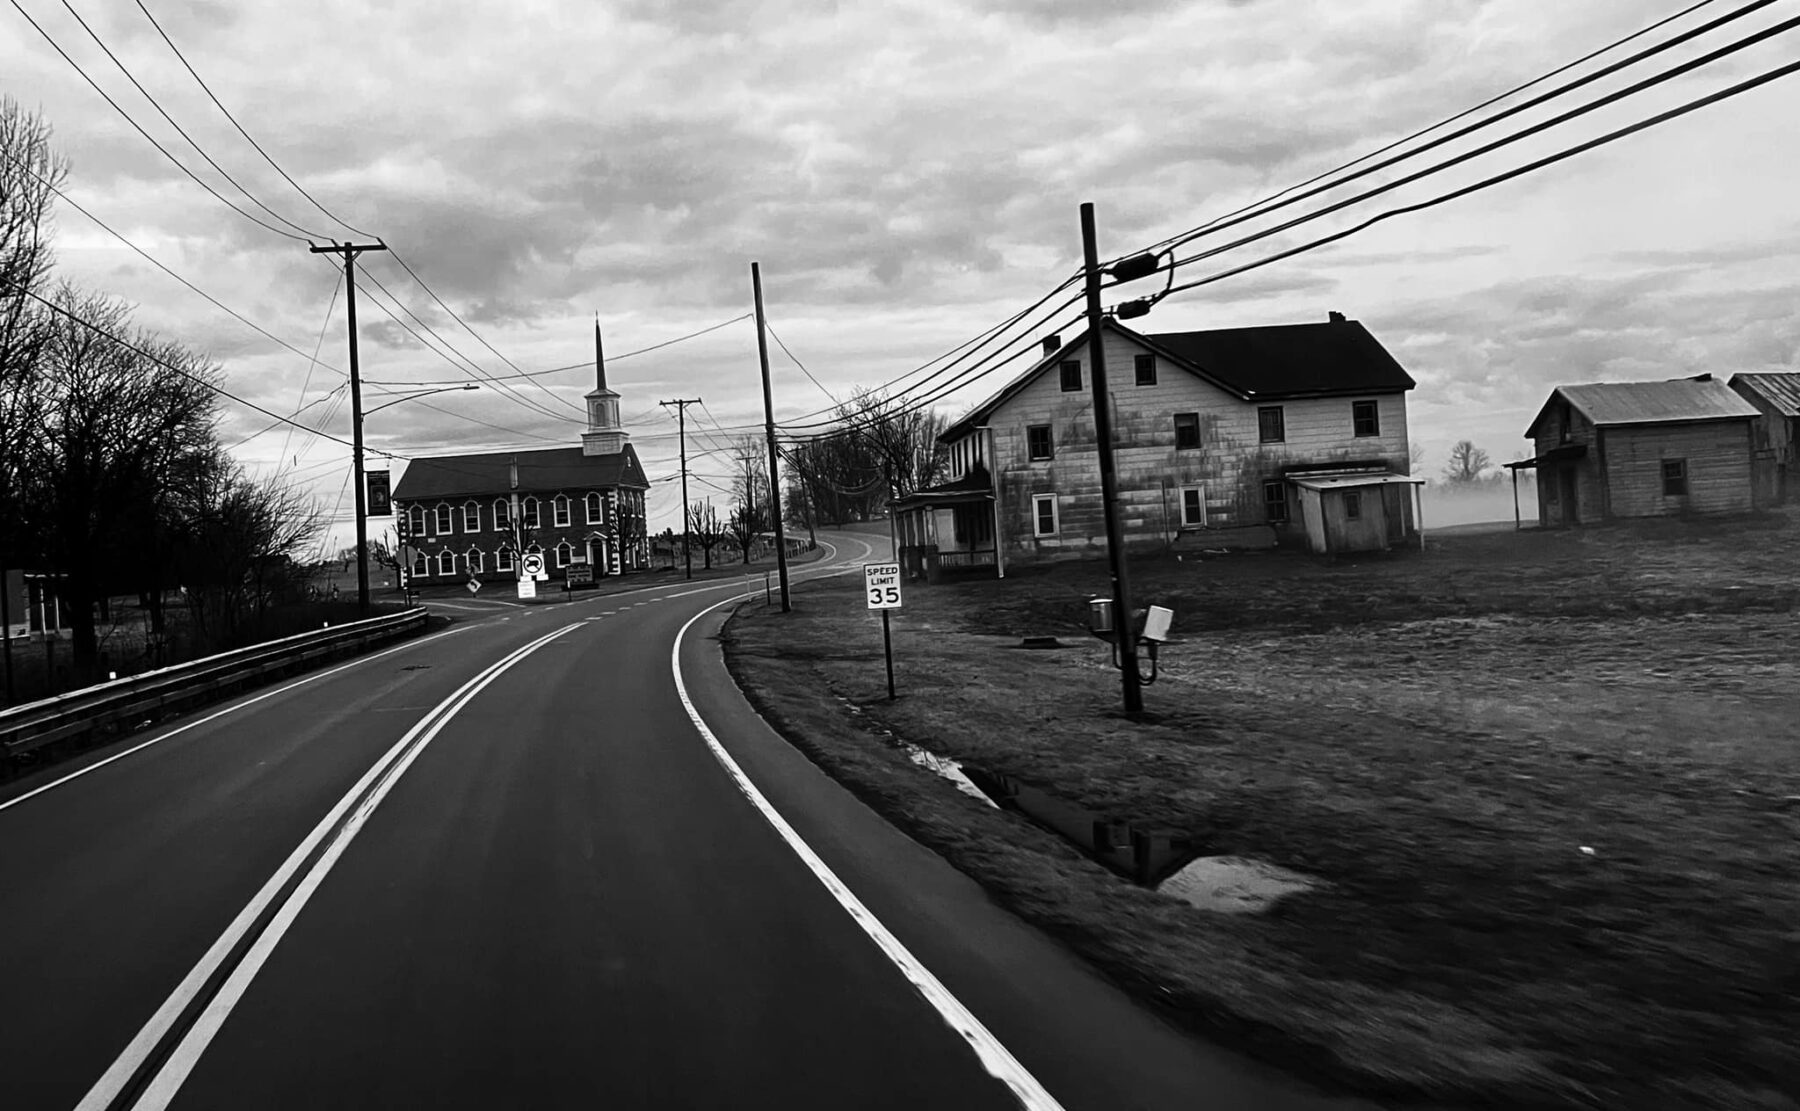 A Virginia roadside, photographed and edited by Ned